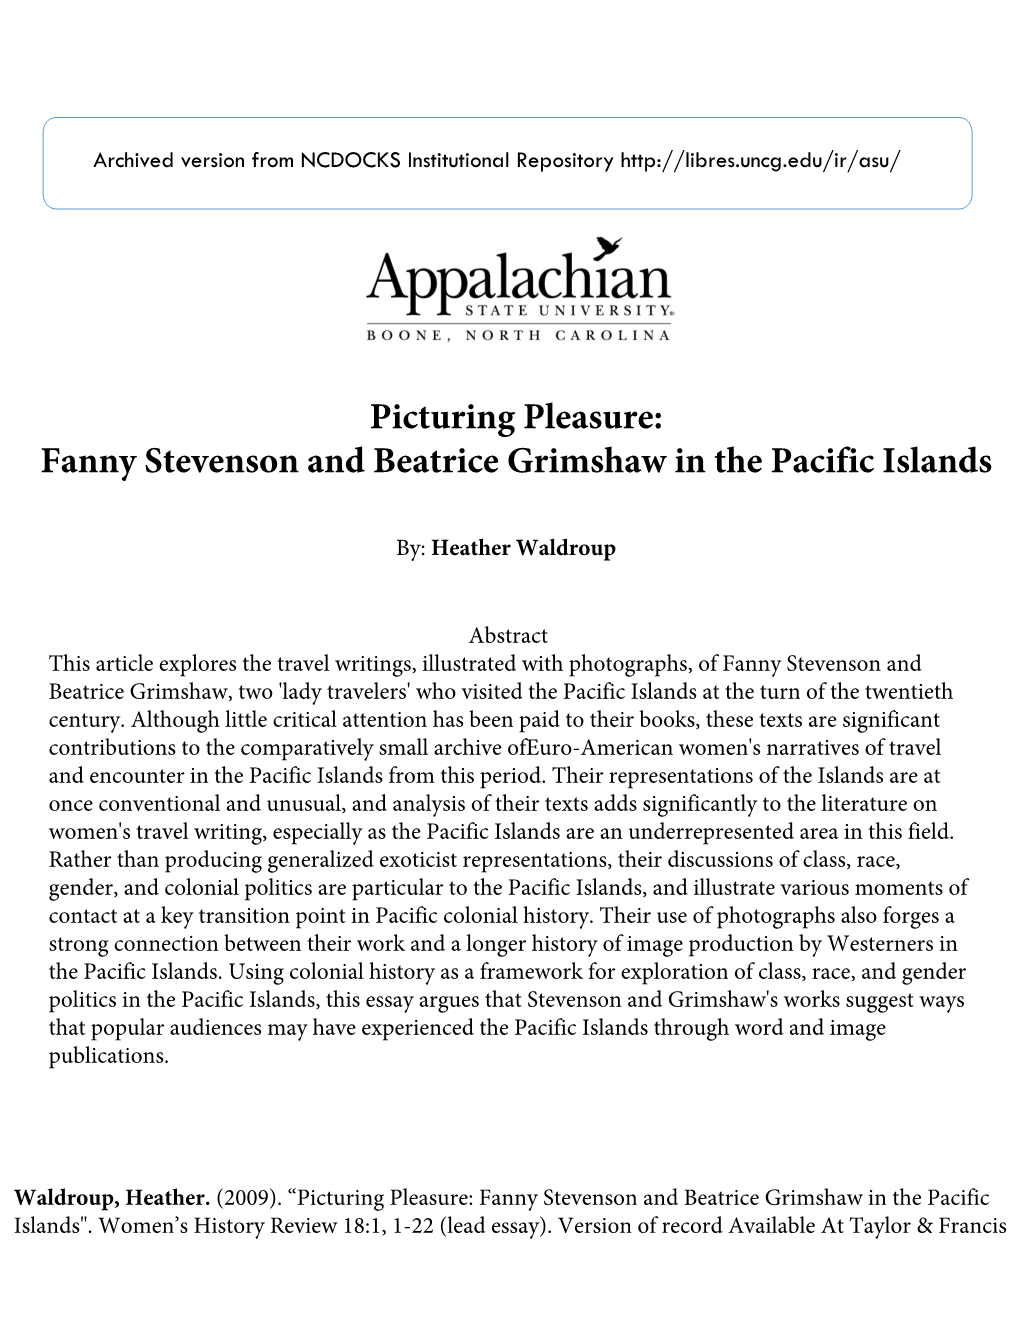 Picturing Pleasure: Fanny Stevenson and Beatrice Grimshaw in the Pacific Islands